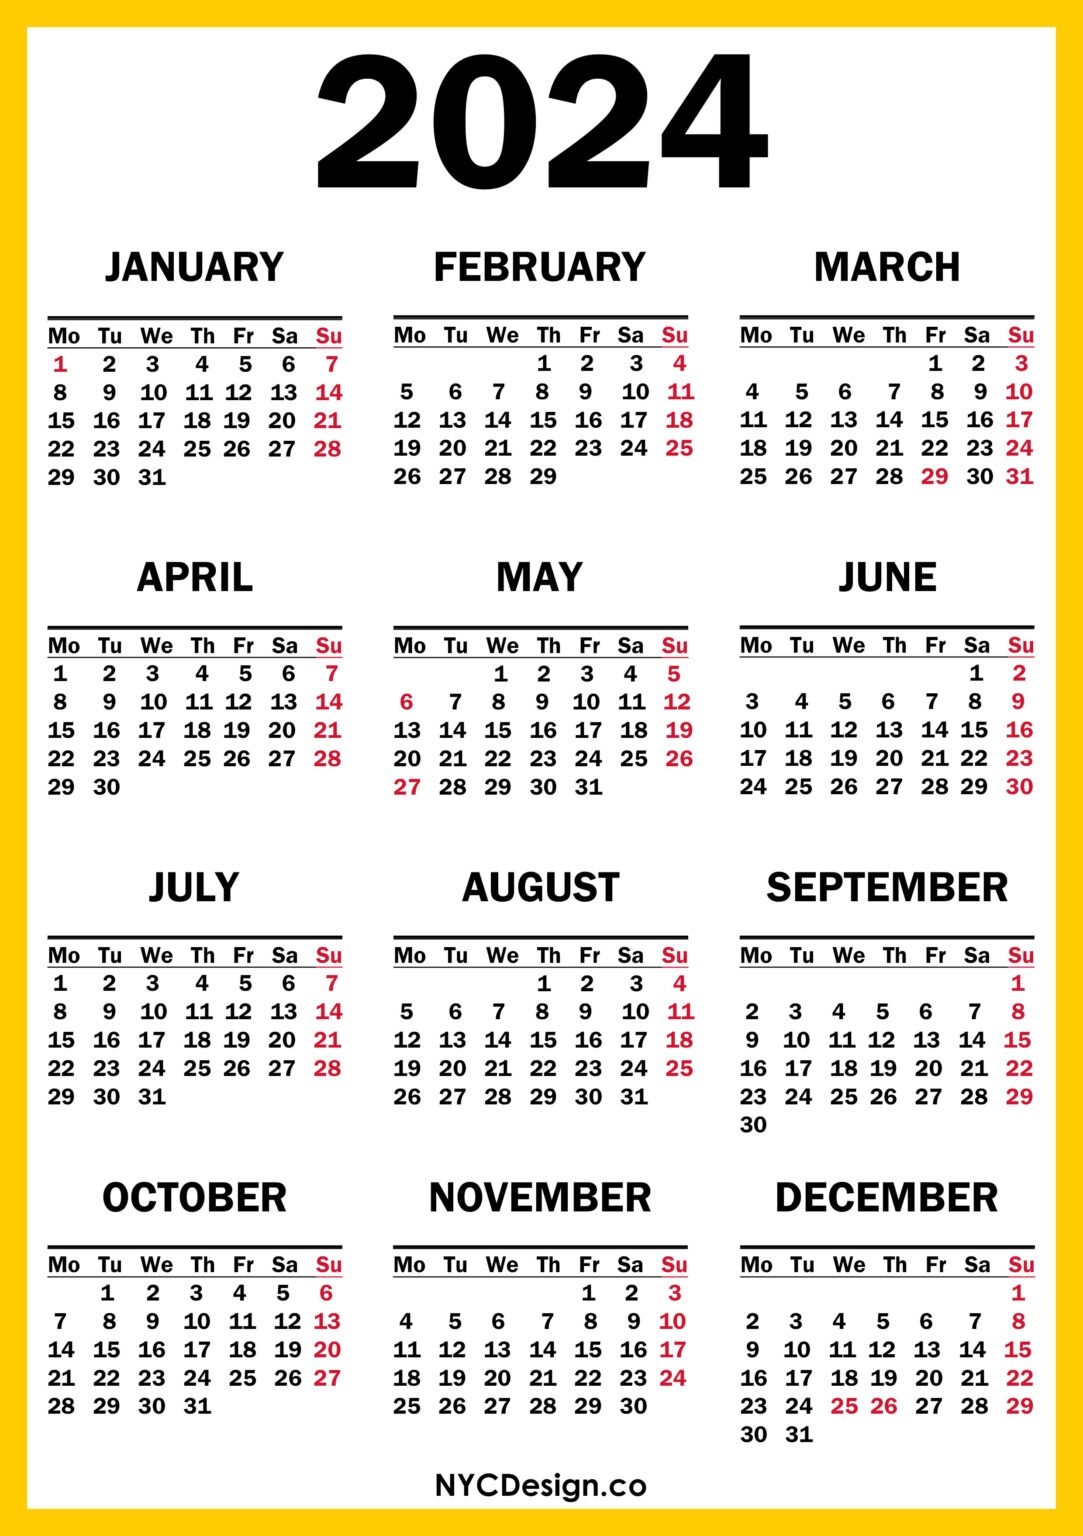 2024 Calendar Templates And Images Printable 2024 Calendar With Us - Free Printable 2024 Calendar With Holidays Download